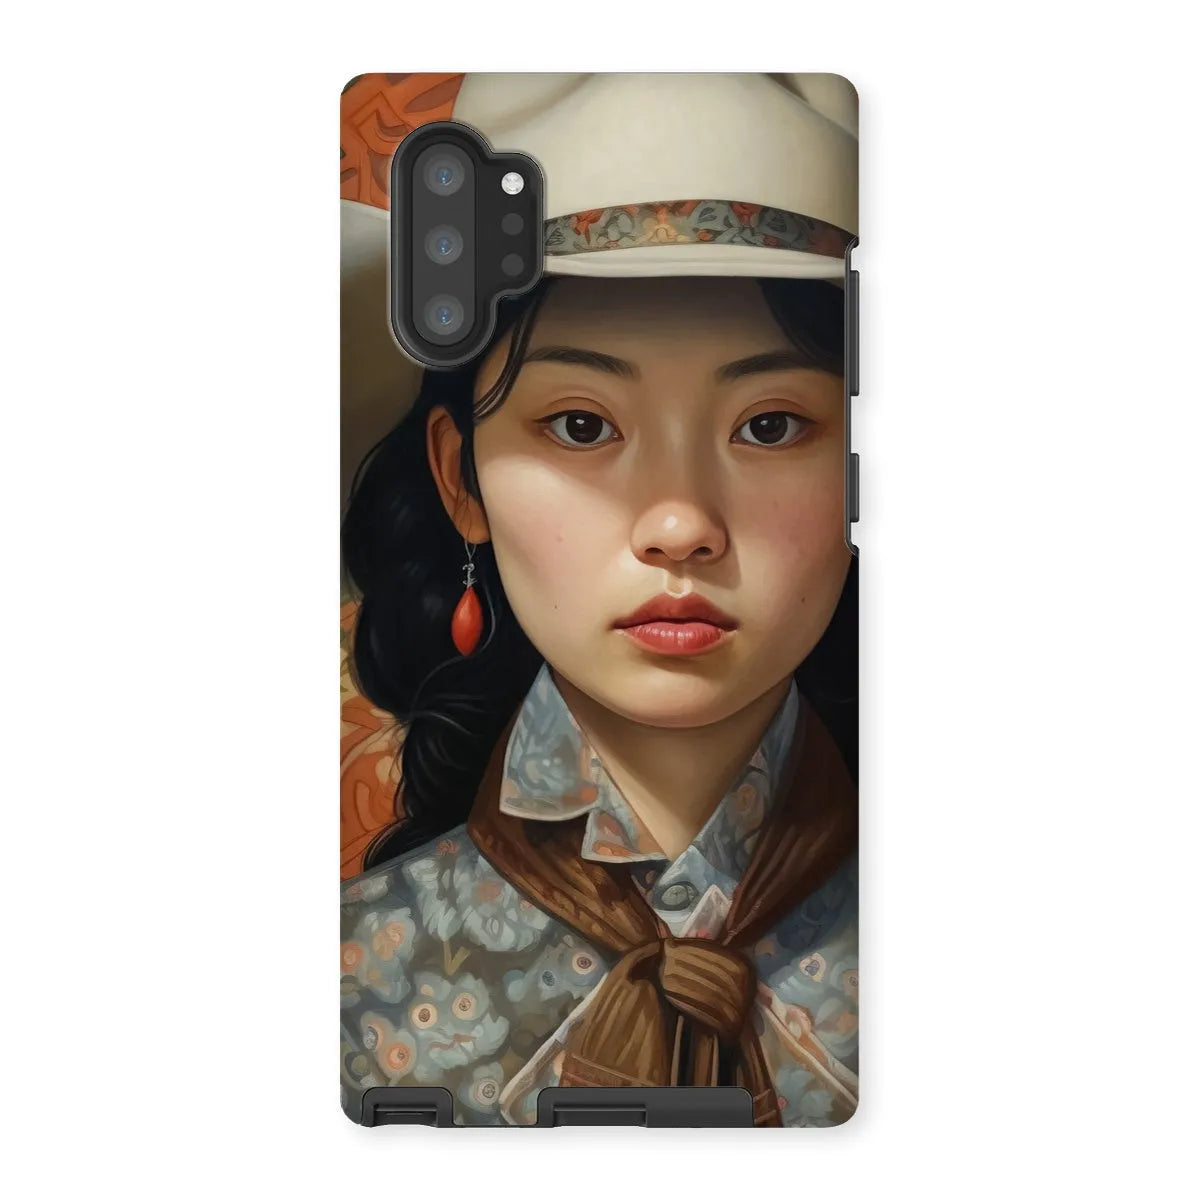 Zhi The Lesbian Cowgirl - Sapphic Art Phone Case - Samsung Galaxy Note 10p / Matte - Mobile Phone Cases - Aesthetic Art